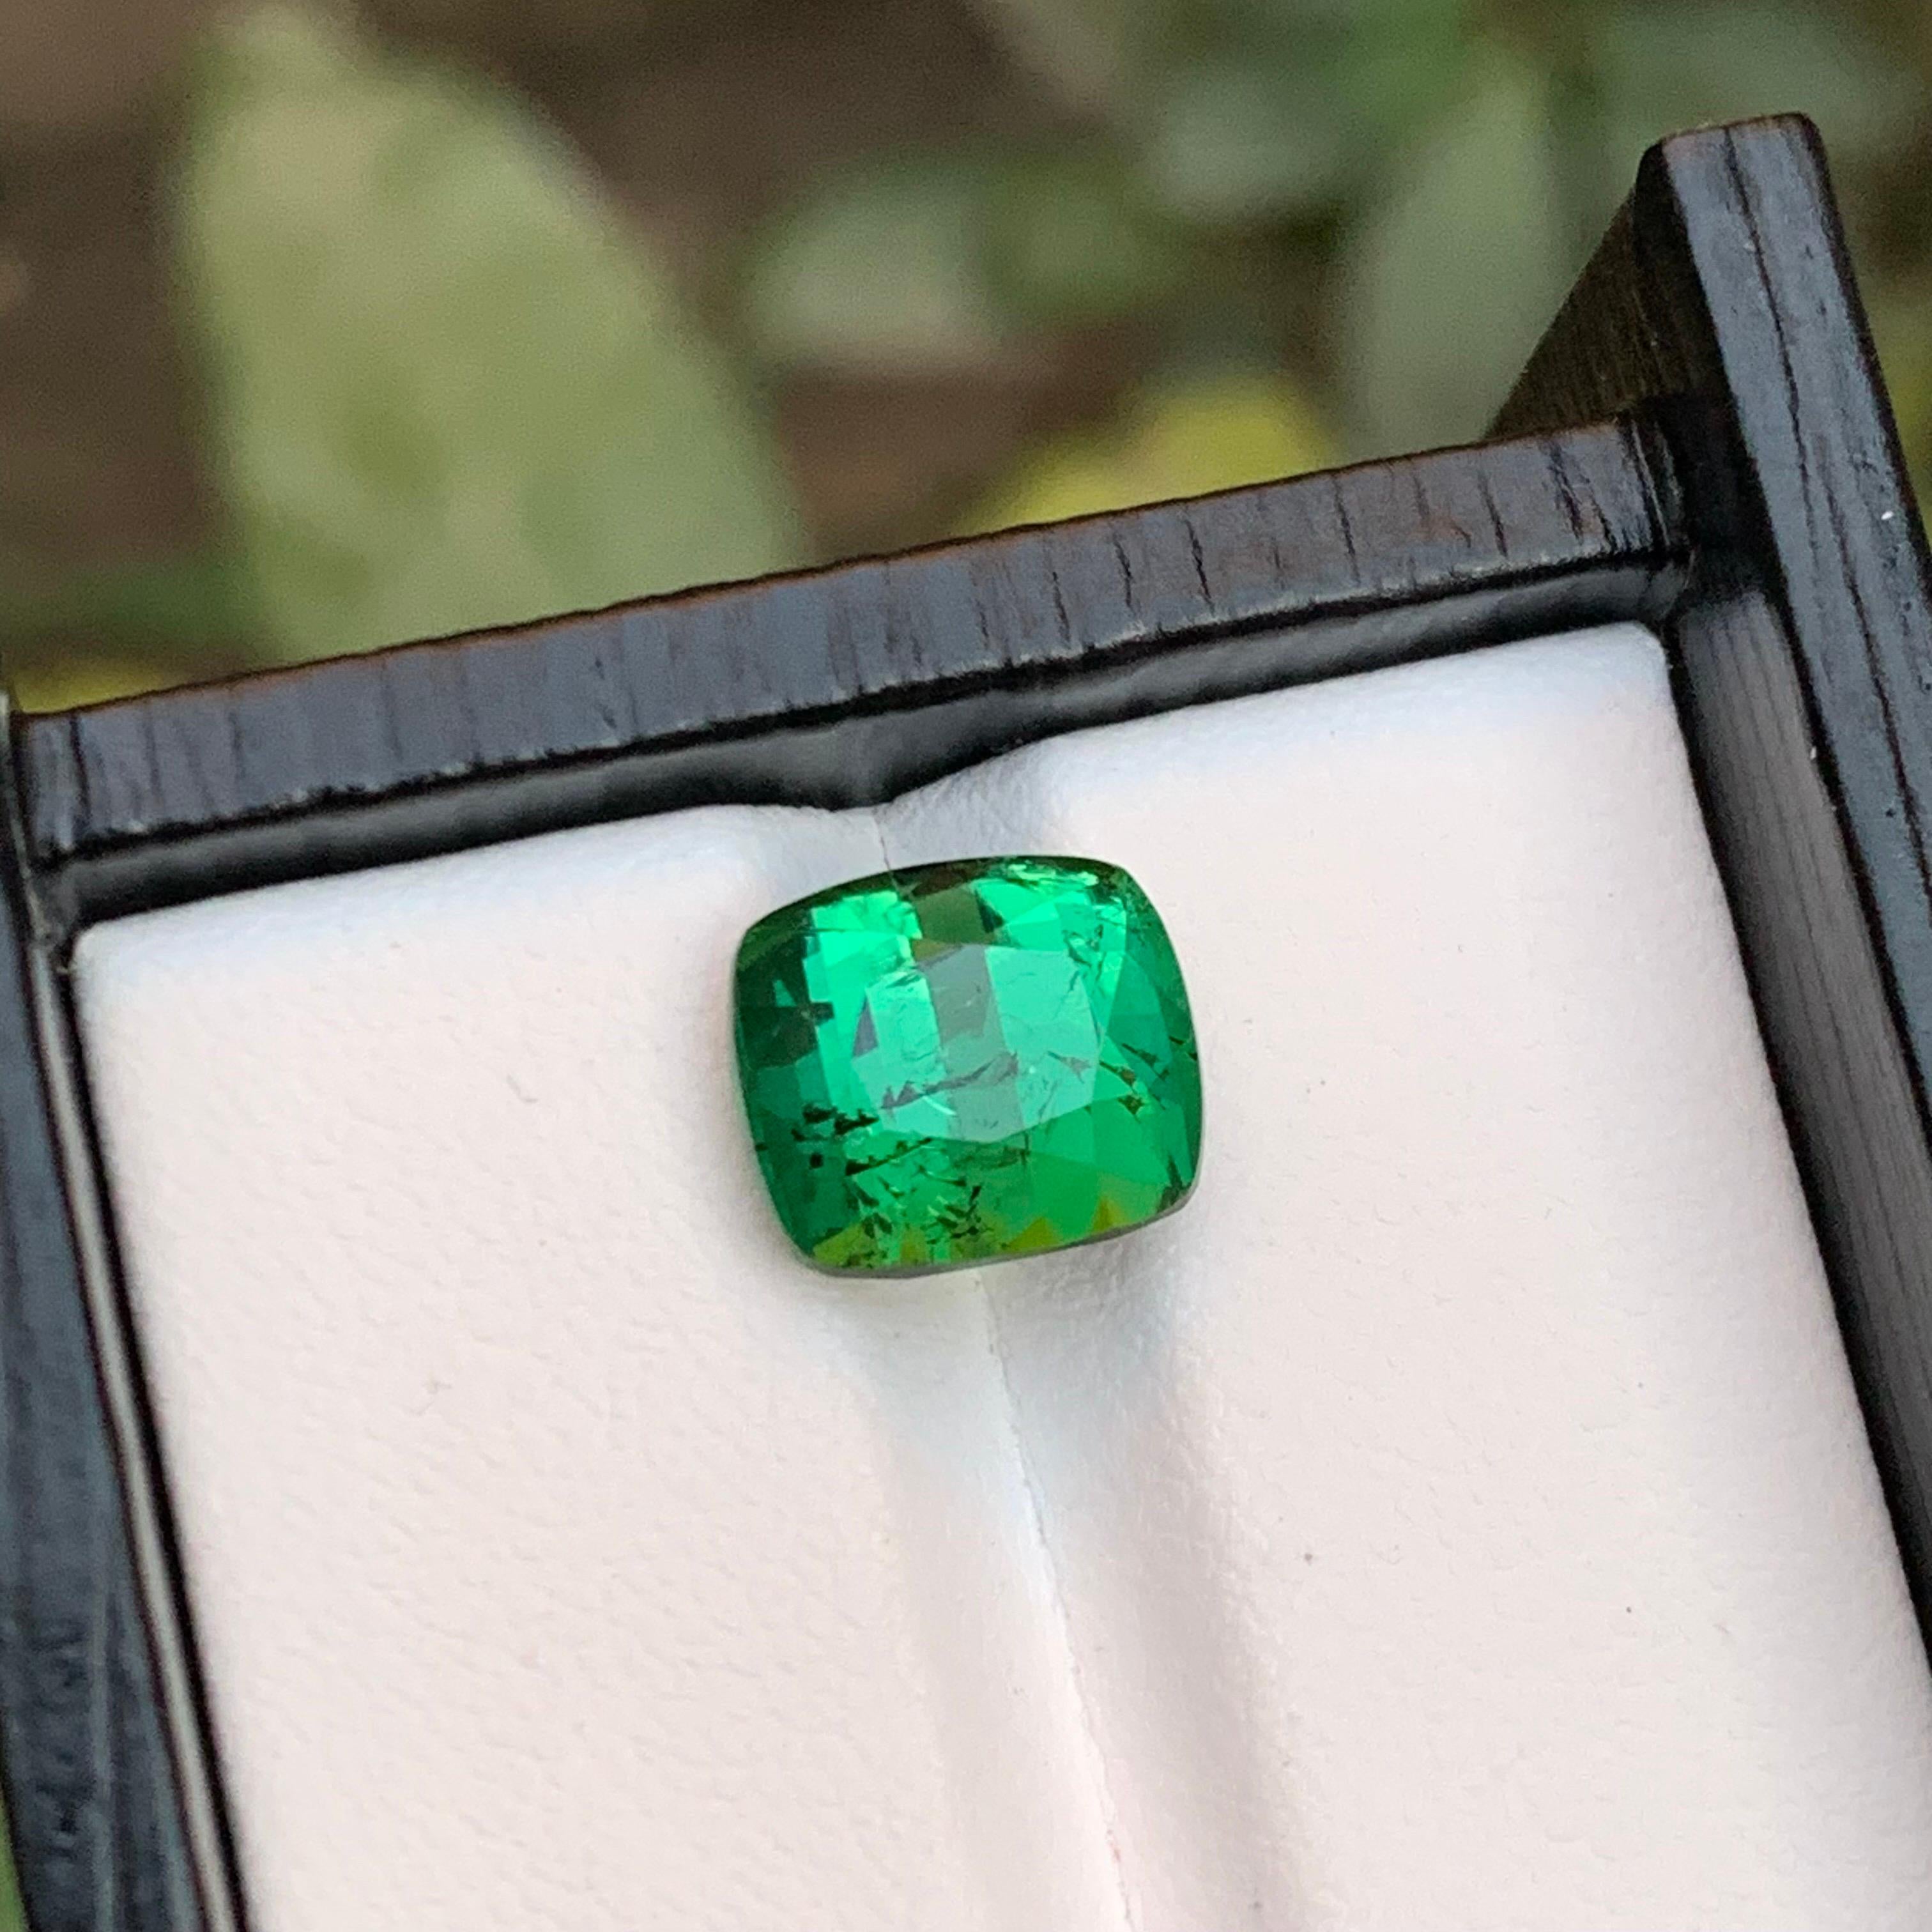 Remarkable Cushion Cut Bluish Green Natural Tourmaline from Kunar Mines of Afghanistan with excellent luster. 

Gemstone Type: Tourmaline
Weight: 5.05 Carats
Dimensions: 8.78 x 9.99 x 7.44 mm
Color: Green
Clarity: Slightly Included
Treatment: Not